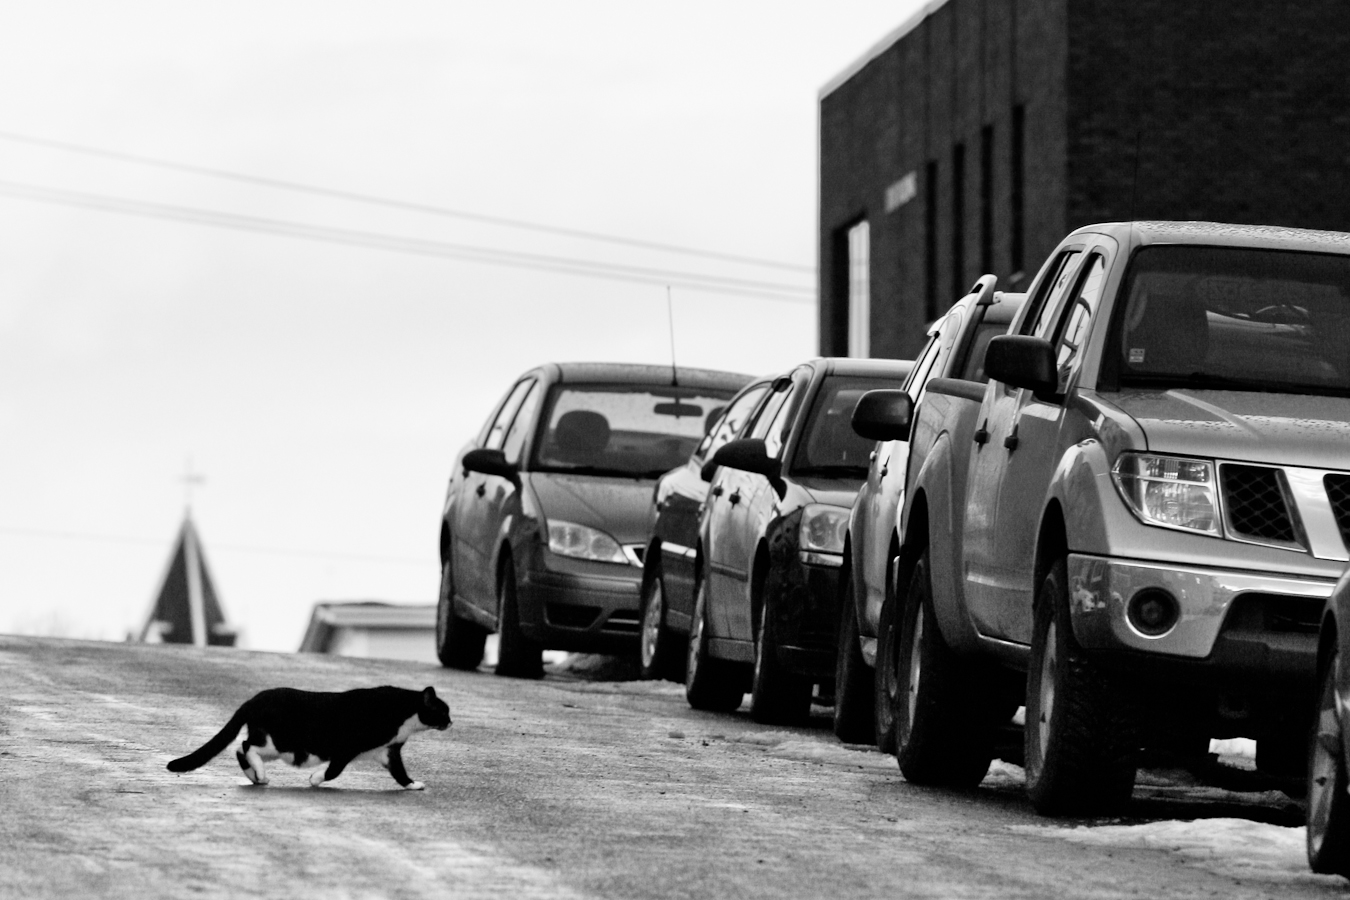 Kitty crossing shot by //d. for A City Like Ours